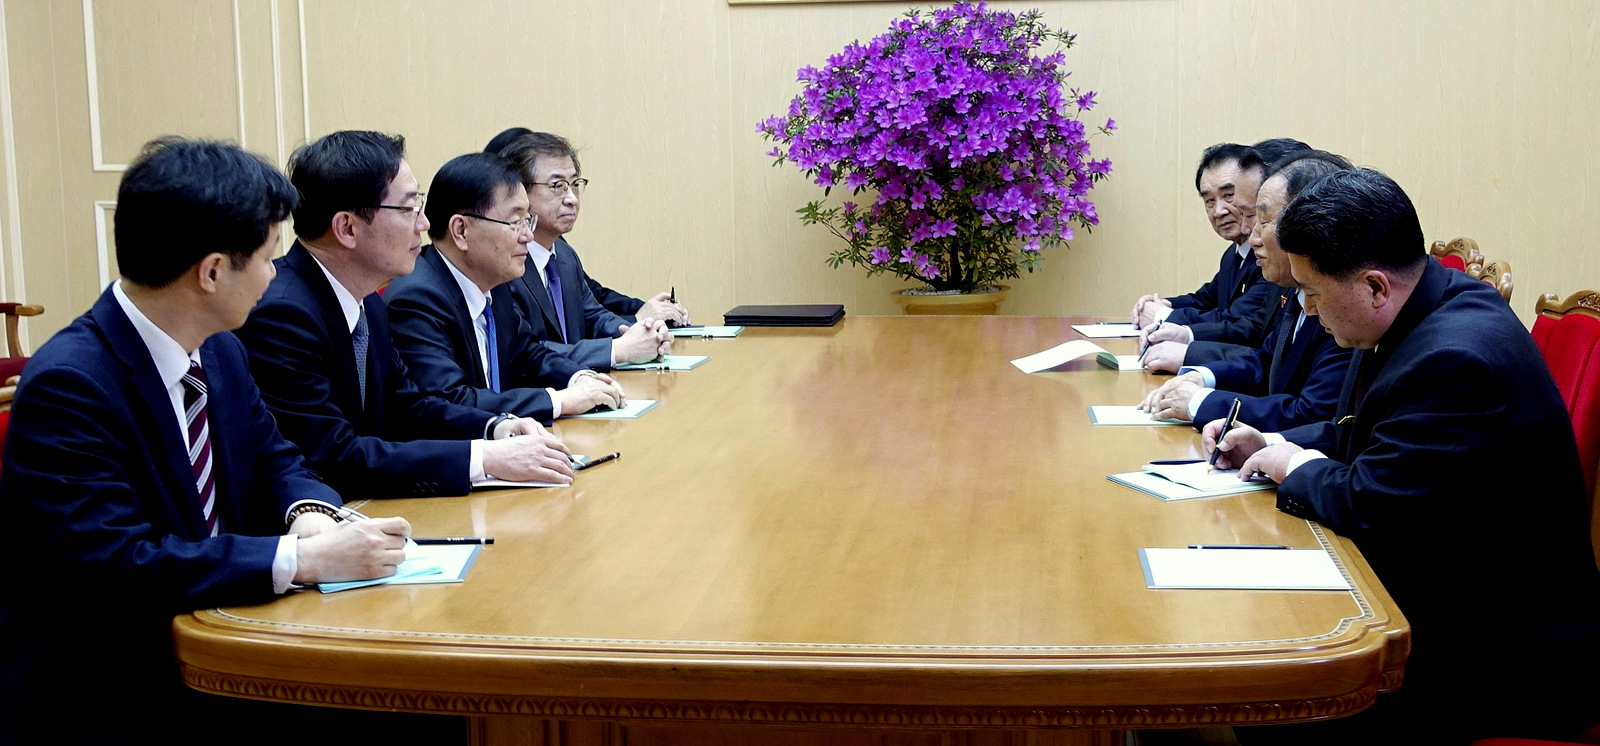 South Korean national security director, Chung Eui-yong, third from left, meets with North Korean vice chairman of North Korea's ruling Workers' Party Central Committee, Kim Yong Chol, second from right, in Pyongyang, North Korea, March 5, 2018. (South Korea Presidential Blue House/Yonhap via AP)